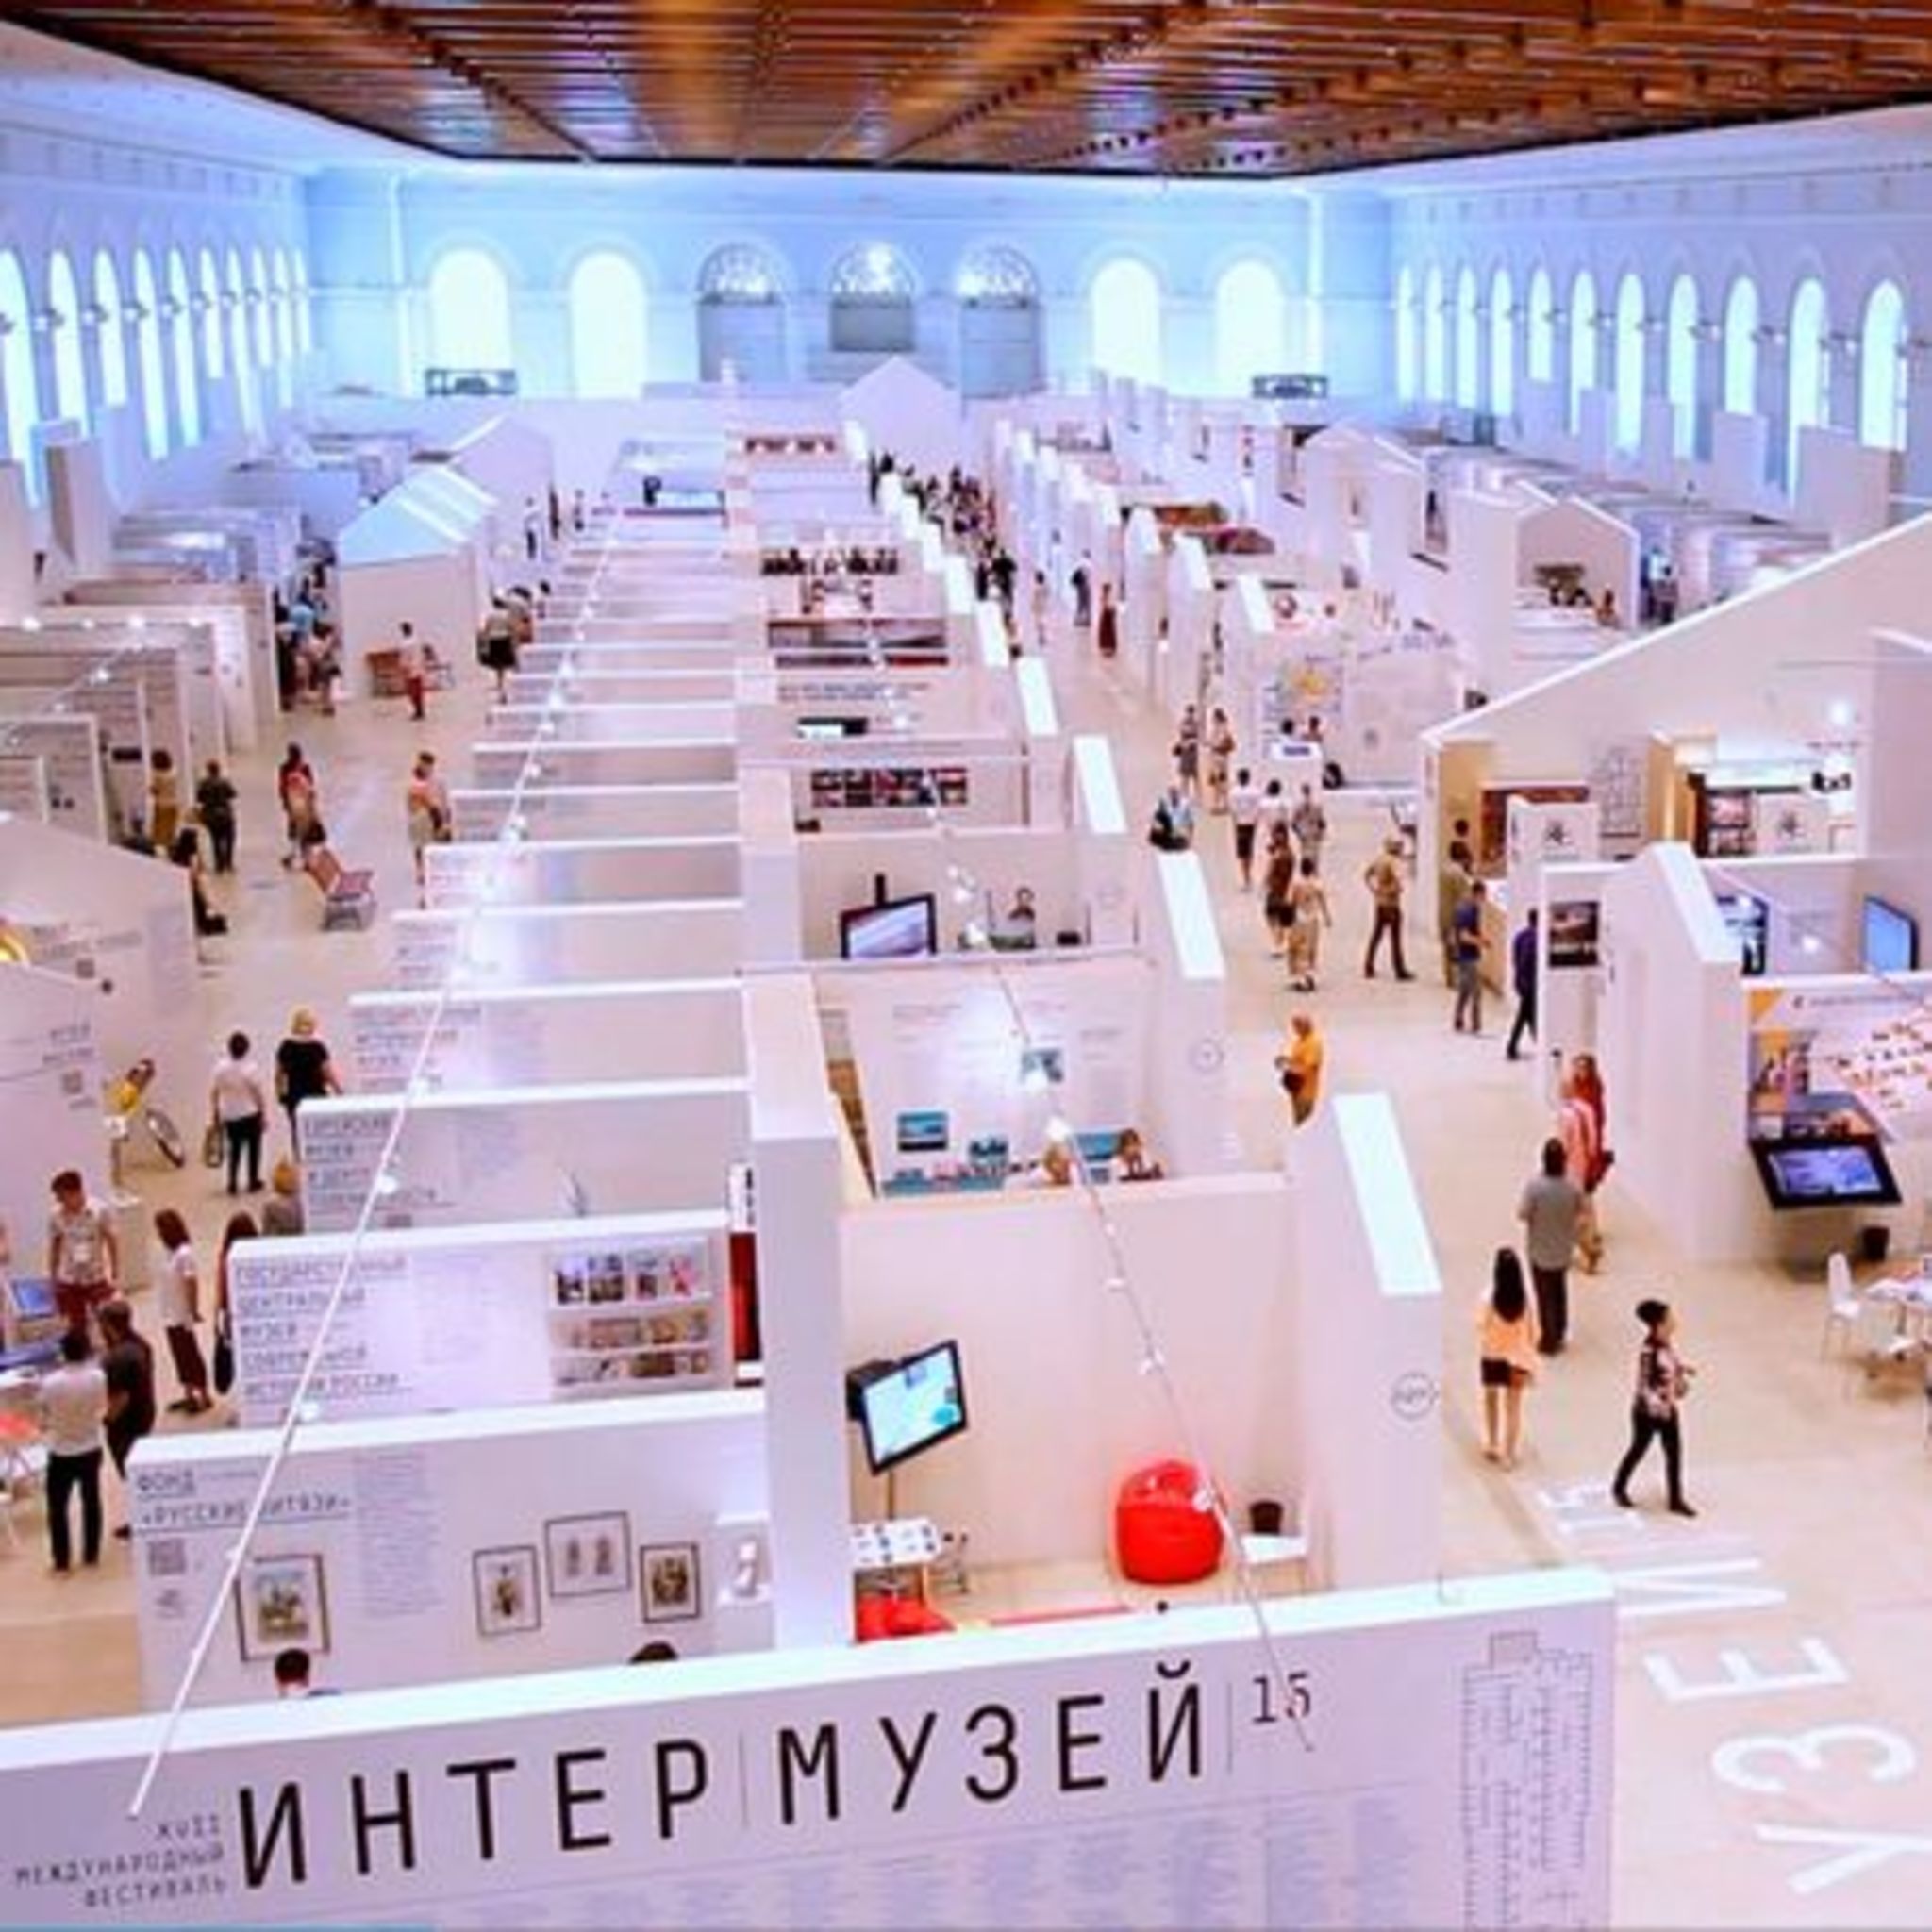 GLM The twentieth century was among the participants of the festival in 2016 Intermuseum